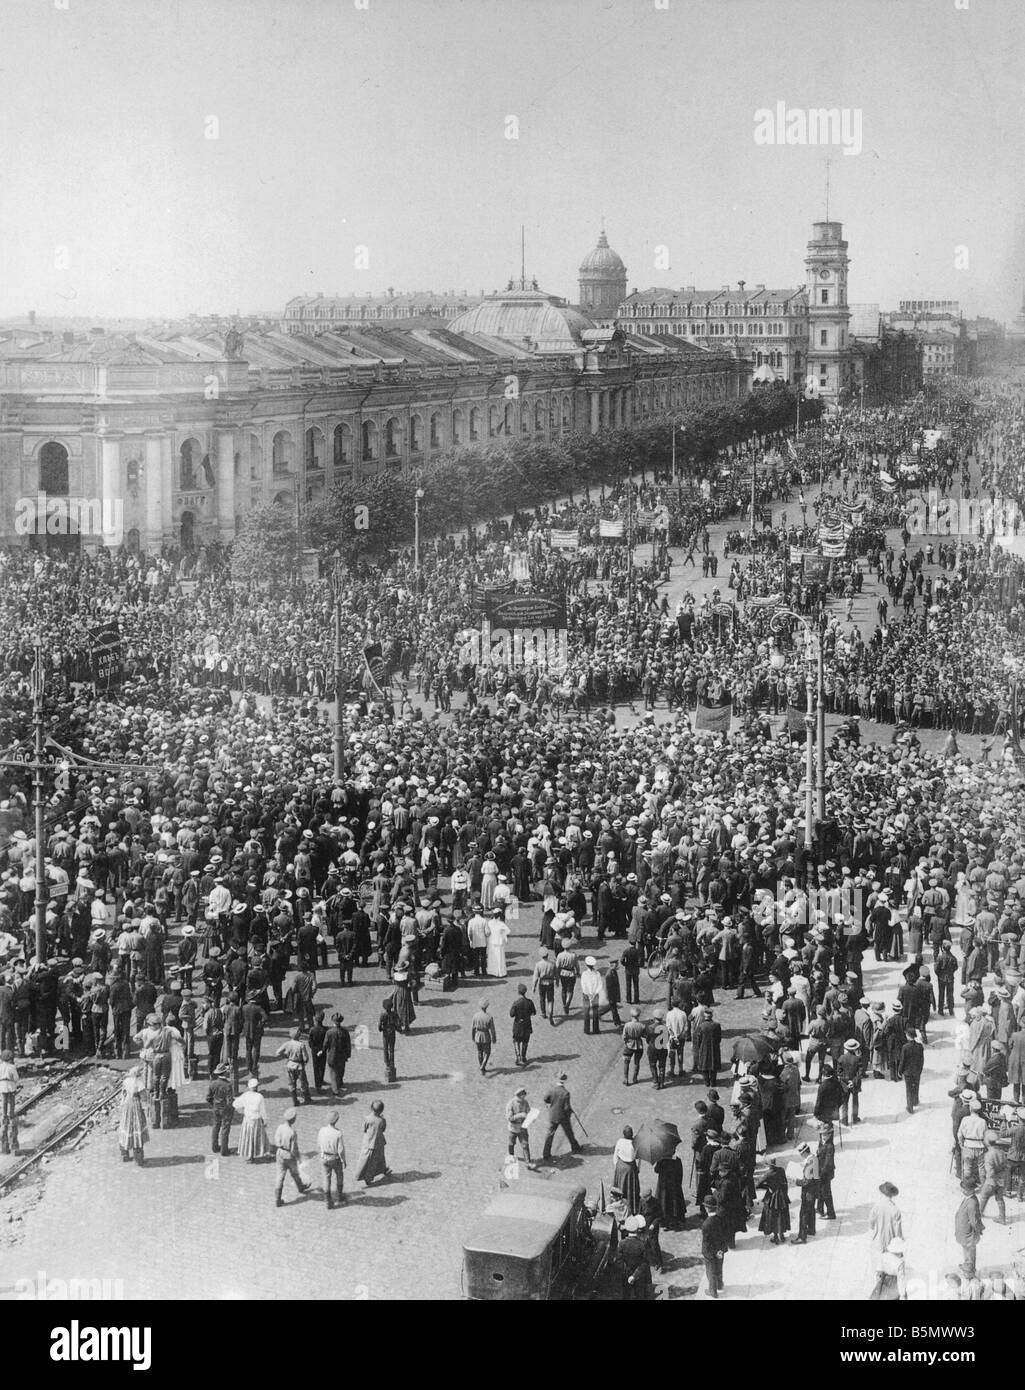 9RD 1917 6 18 A1 Demonstration in Petrograd 18 June 1918 Russian Revolution 1917 Demonstration of revolutionary democrats in Pet Stock Photo